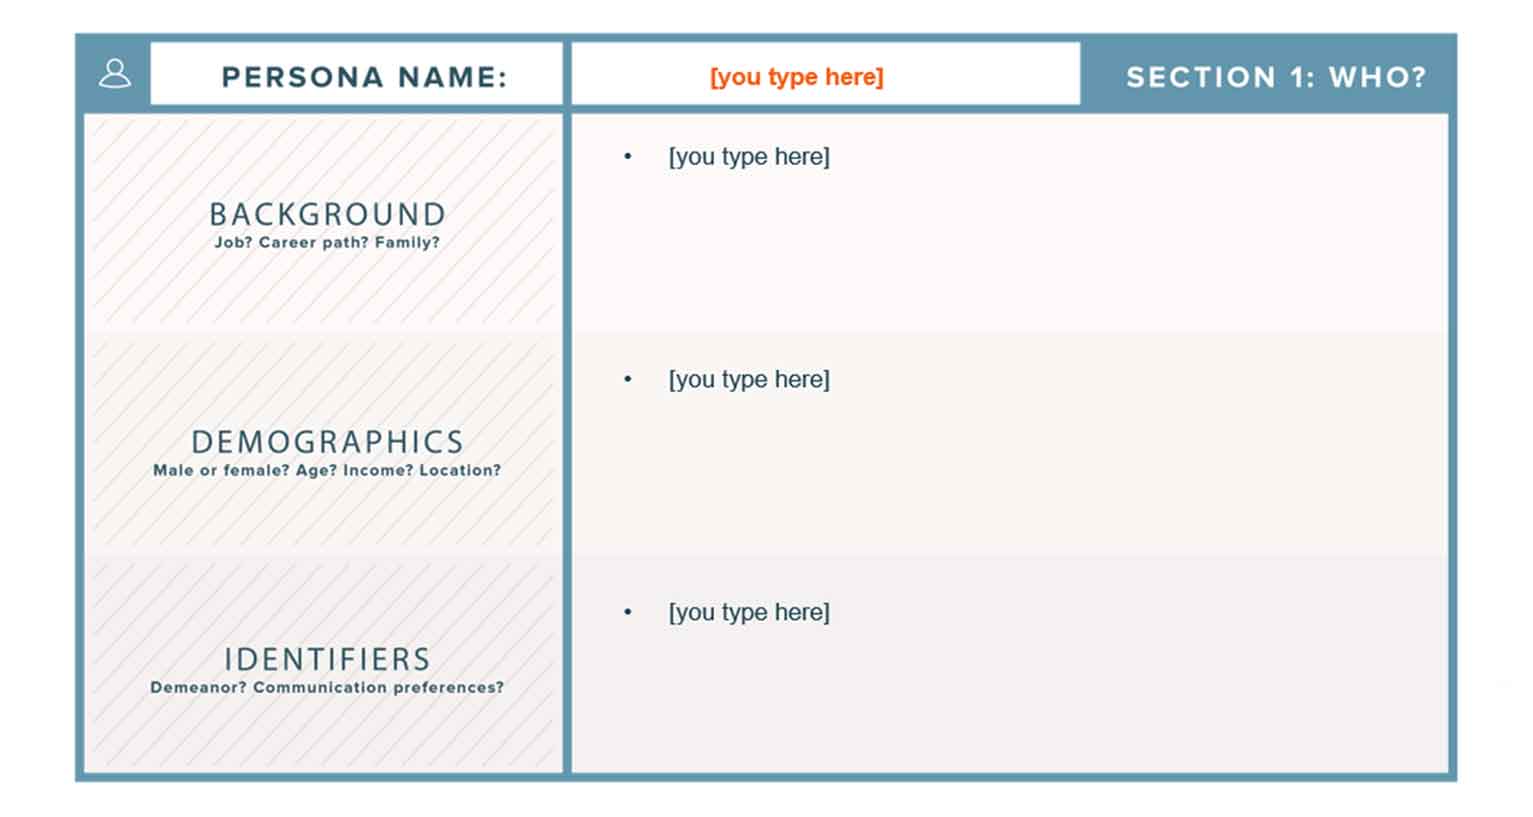 Section 1 of a free template from HubSpot.